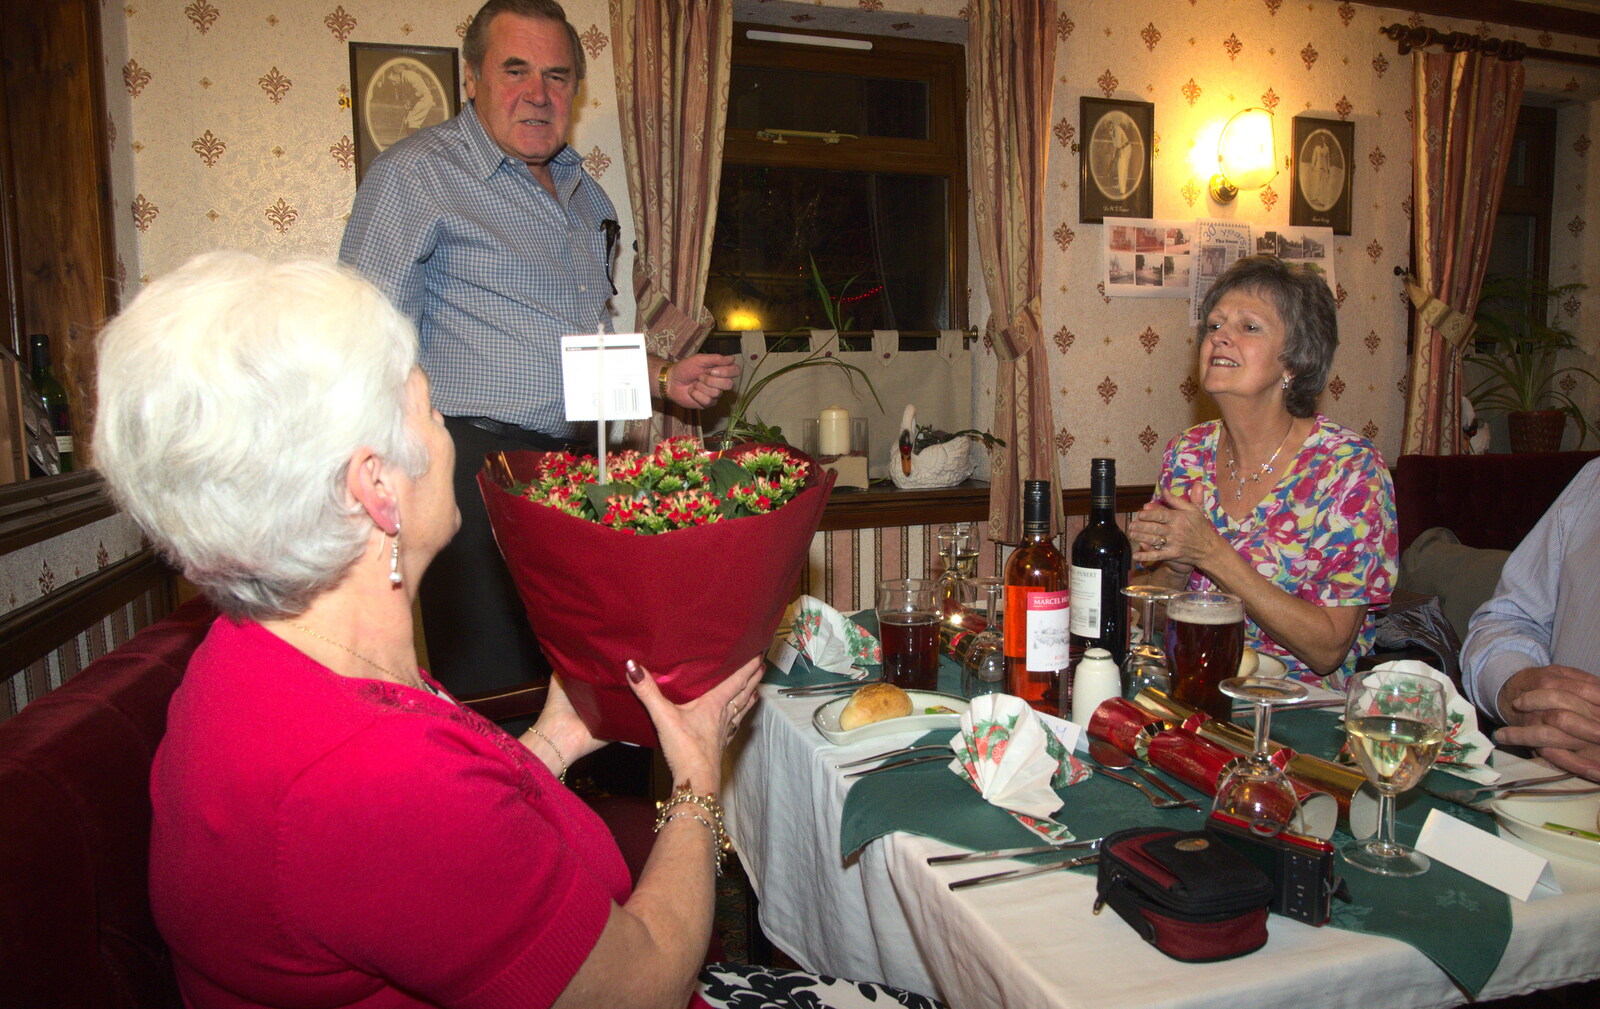 Spammy gets a plant from The BSCC Christmas Dinner, Brome, Suffolk - 7th December 2013